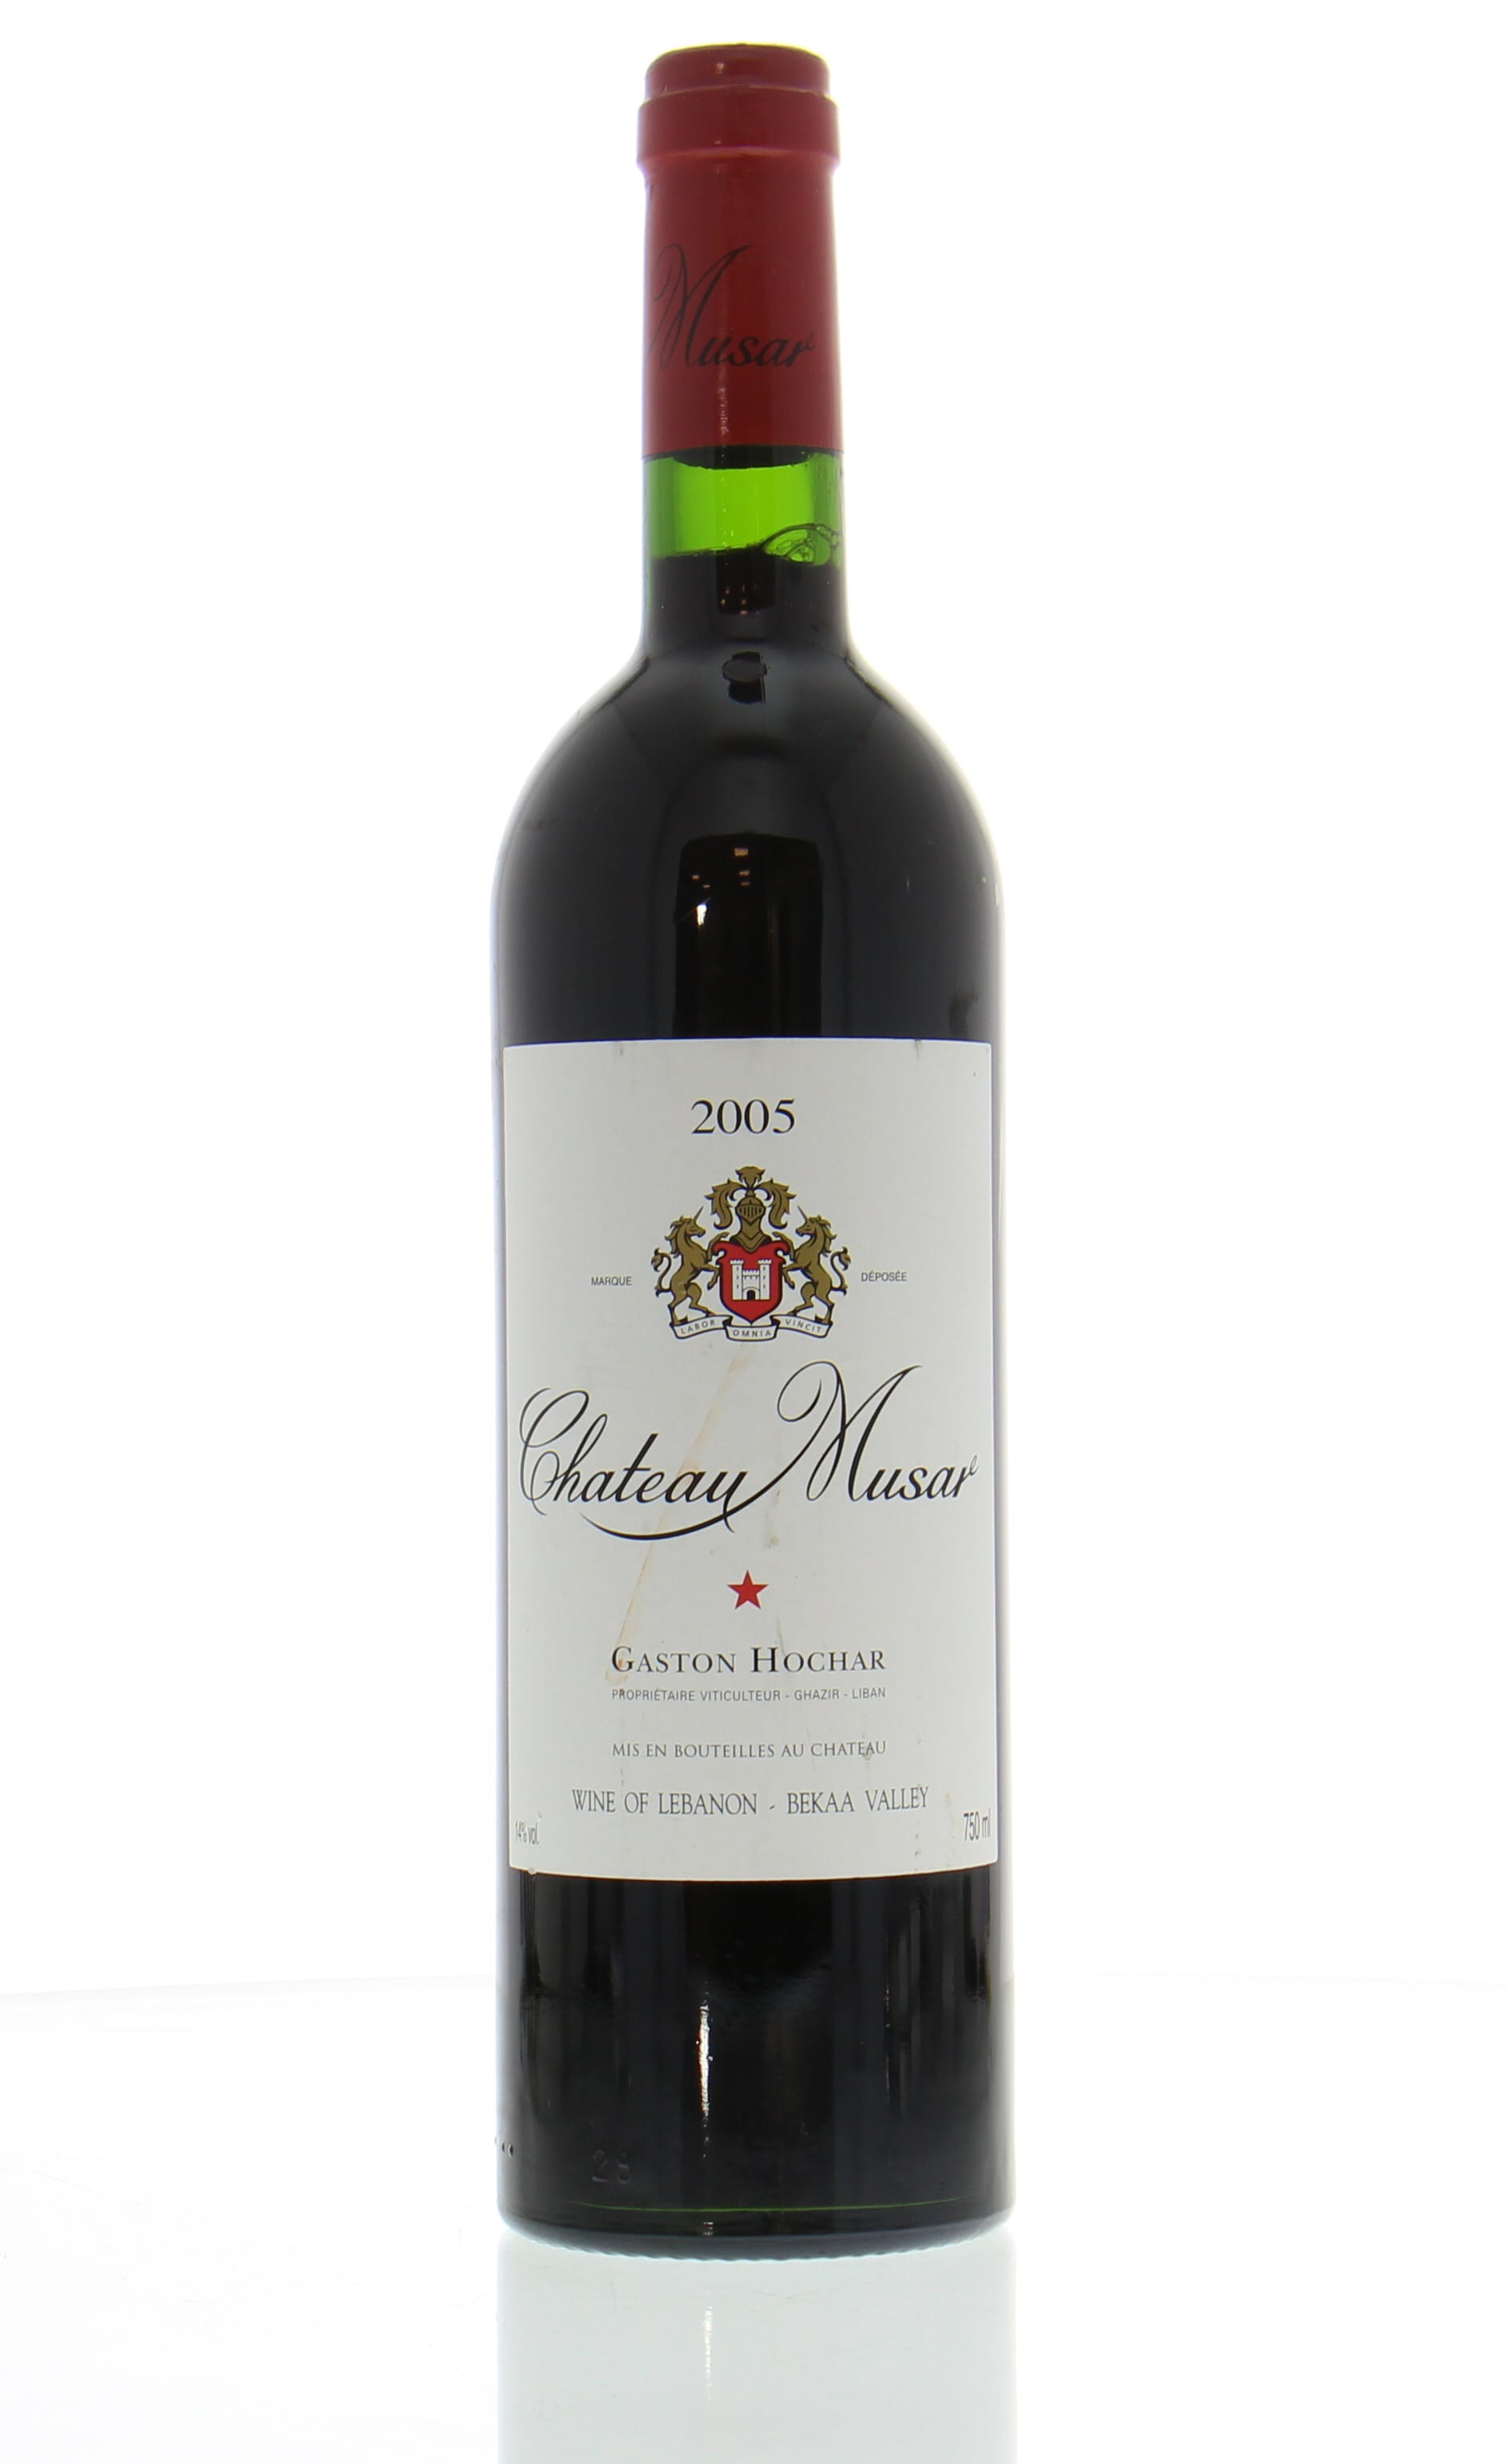 Chateau Musar - Chateau Musar 2005